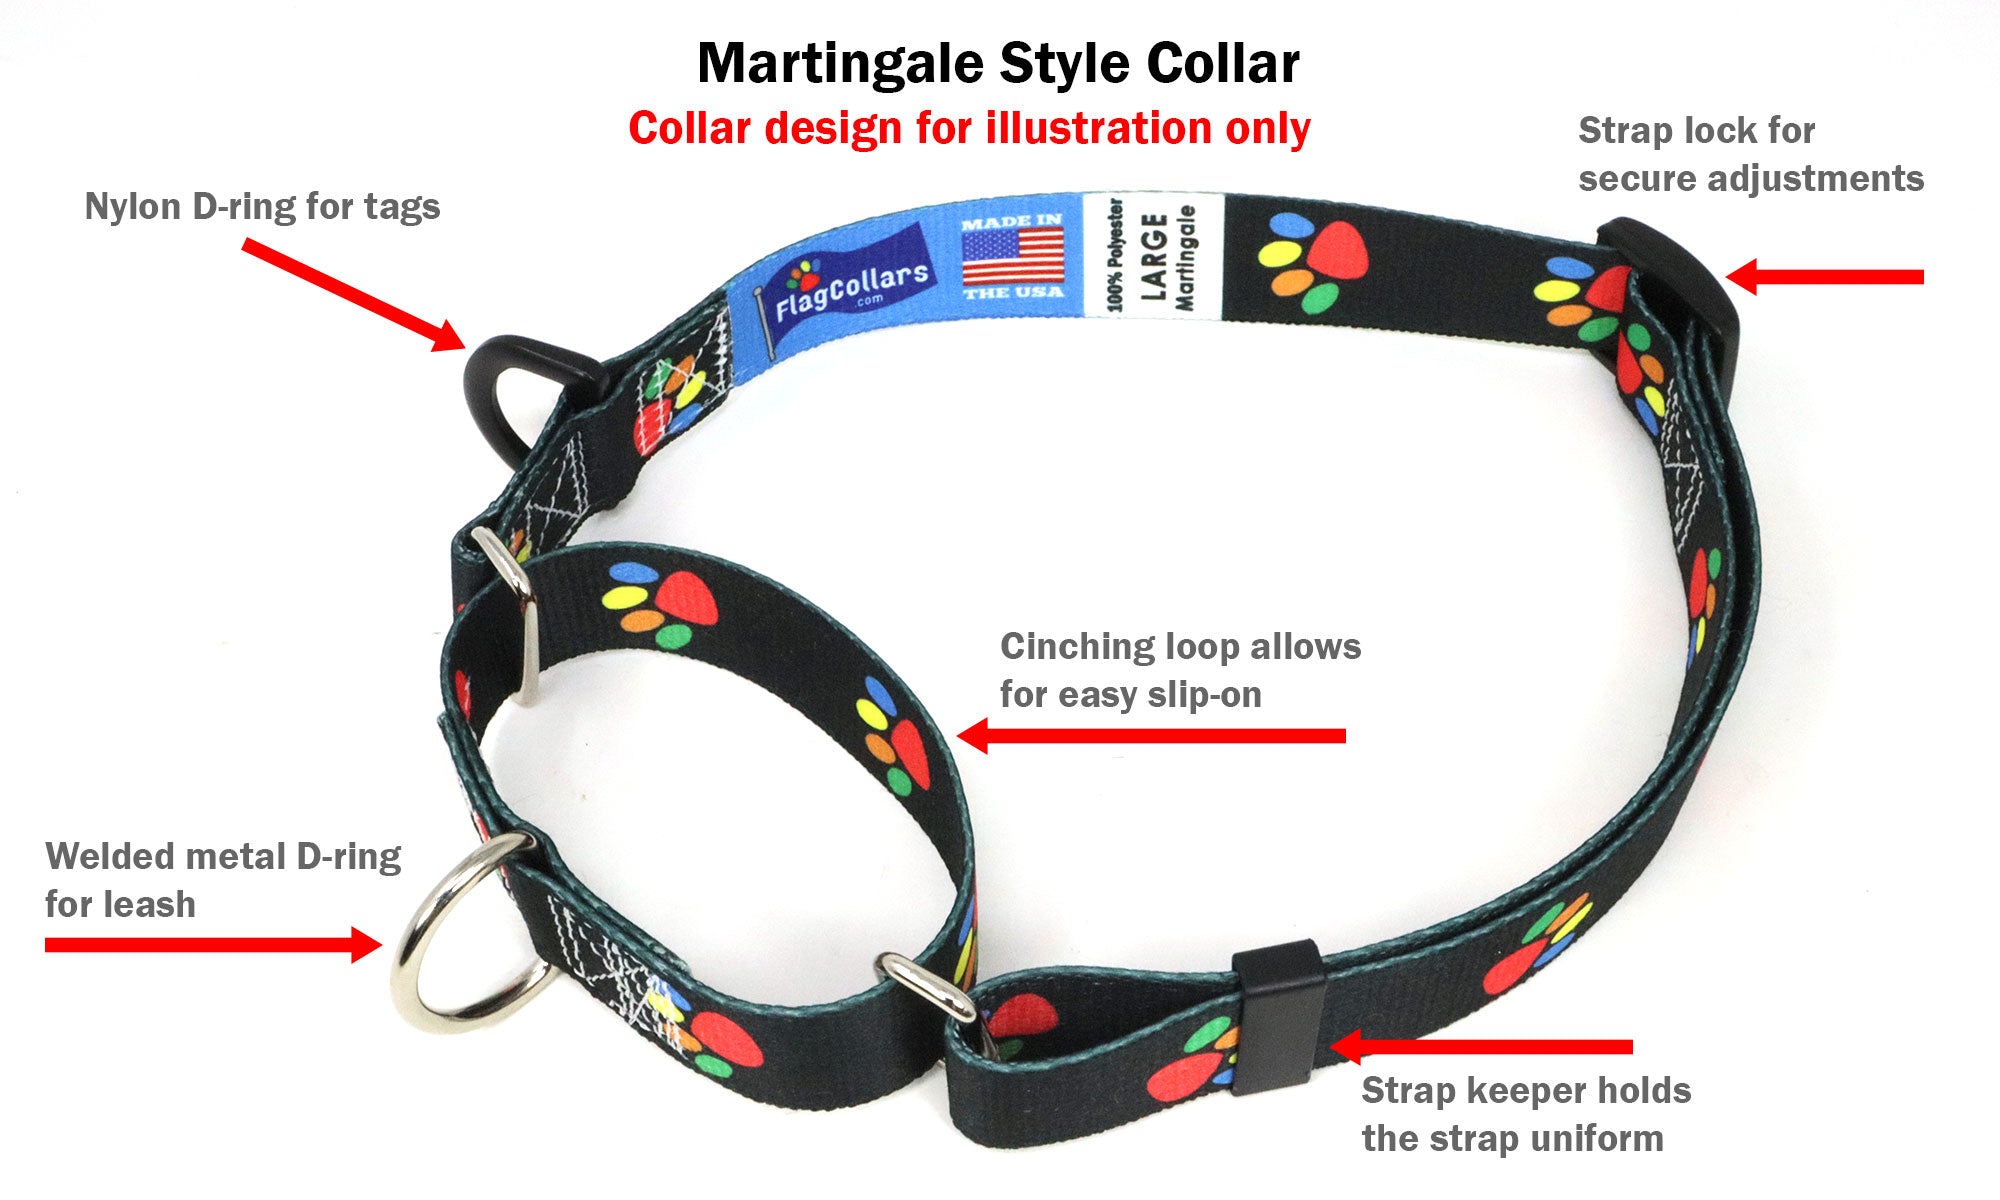 German Dog Collar | Quick Release or Martingale Style | Made in NJ, USA